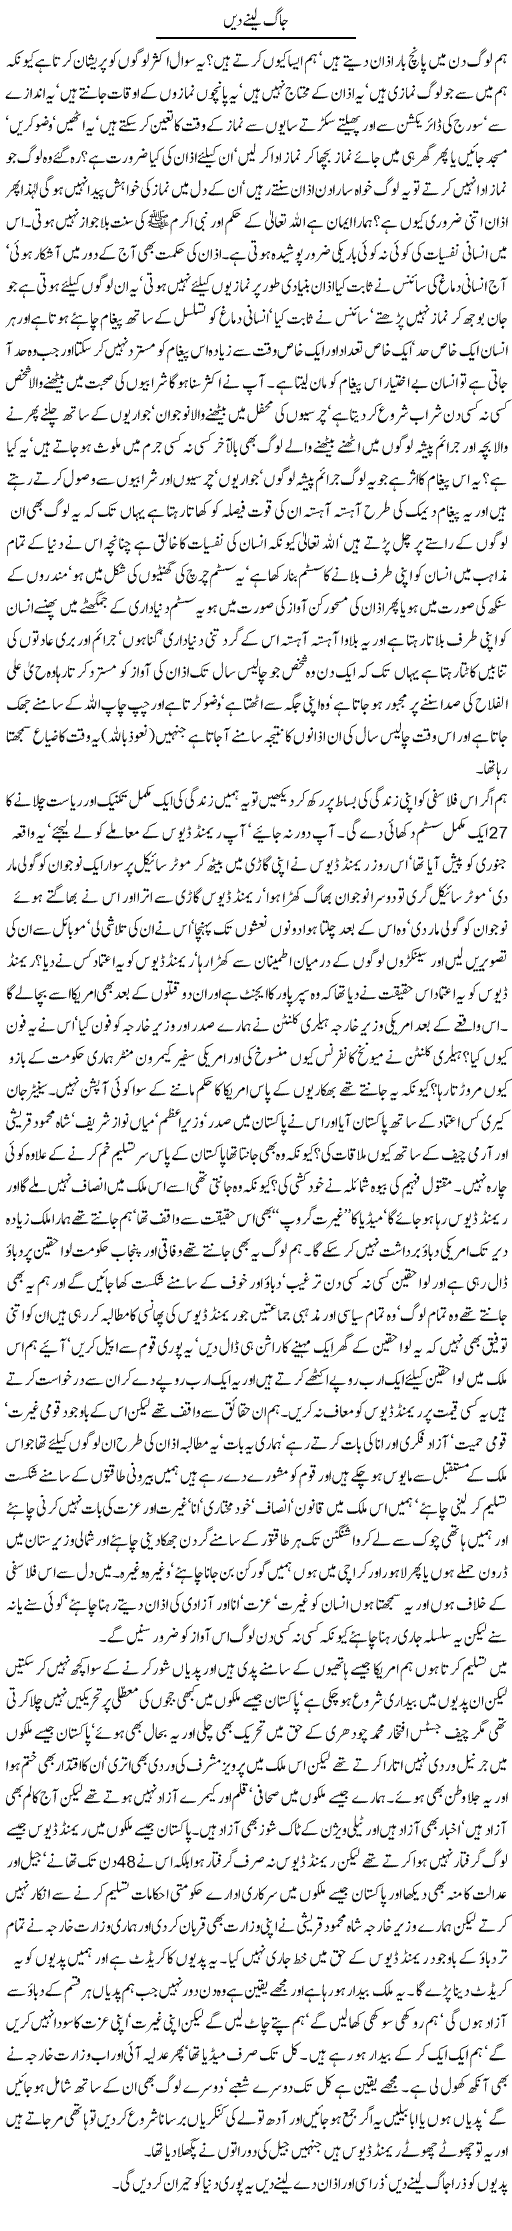 Our Society and Raymond Express Column Javed Chaudhry 18 March 2011